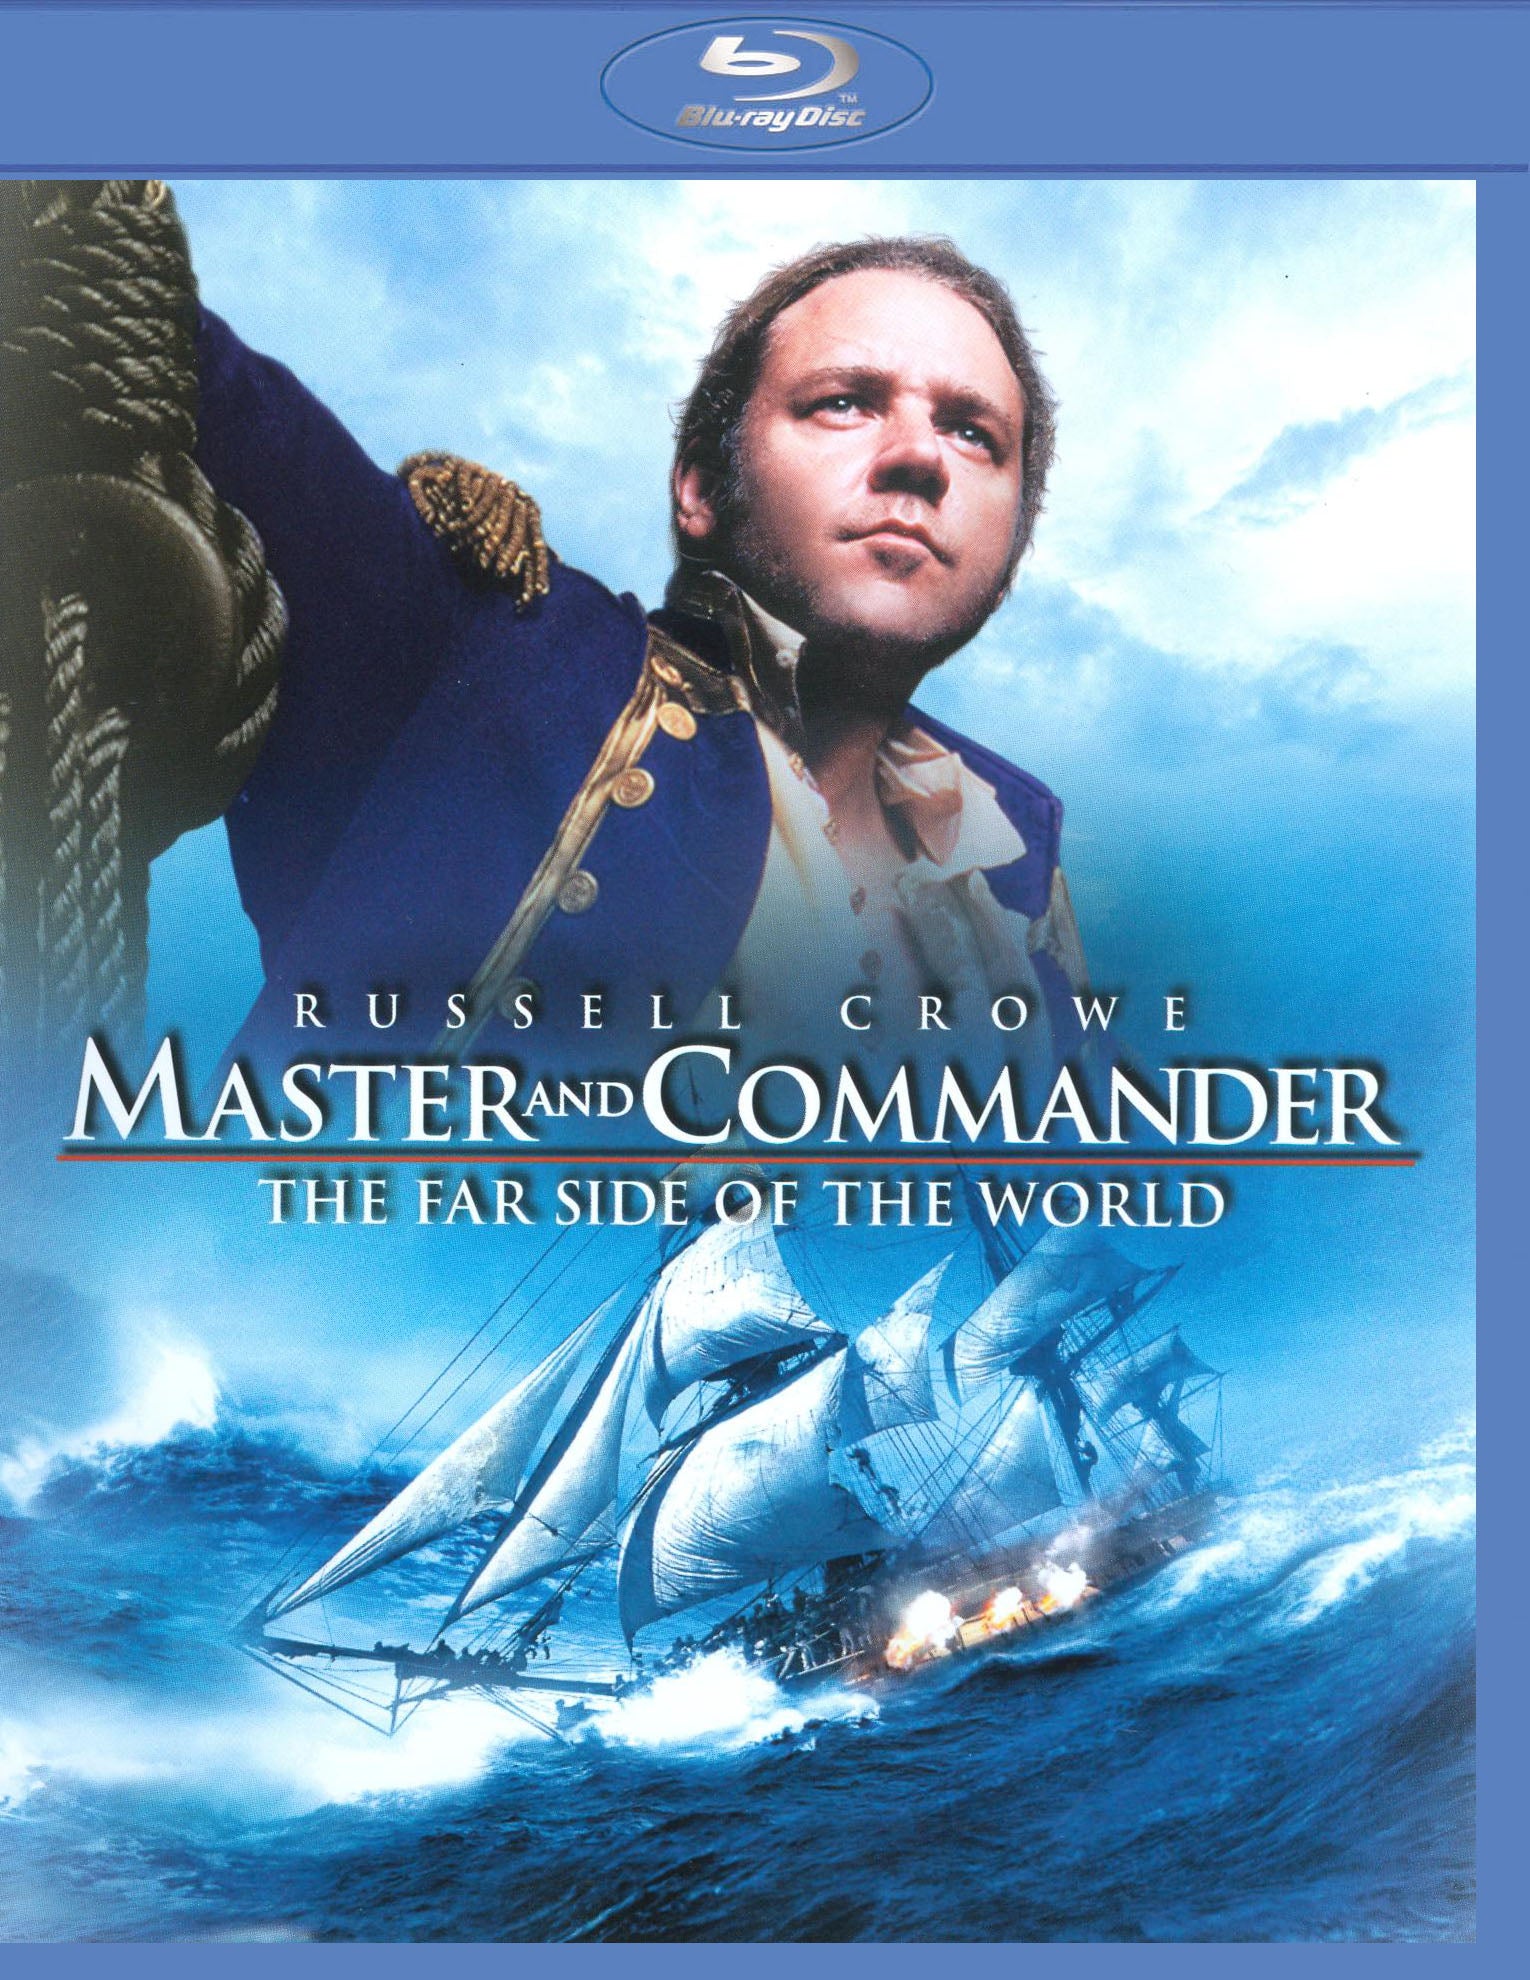 Master and Commander: The Far Side of the World [Blu-ray] cover art